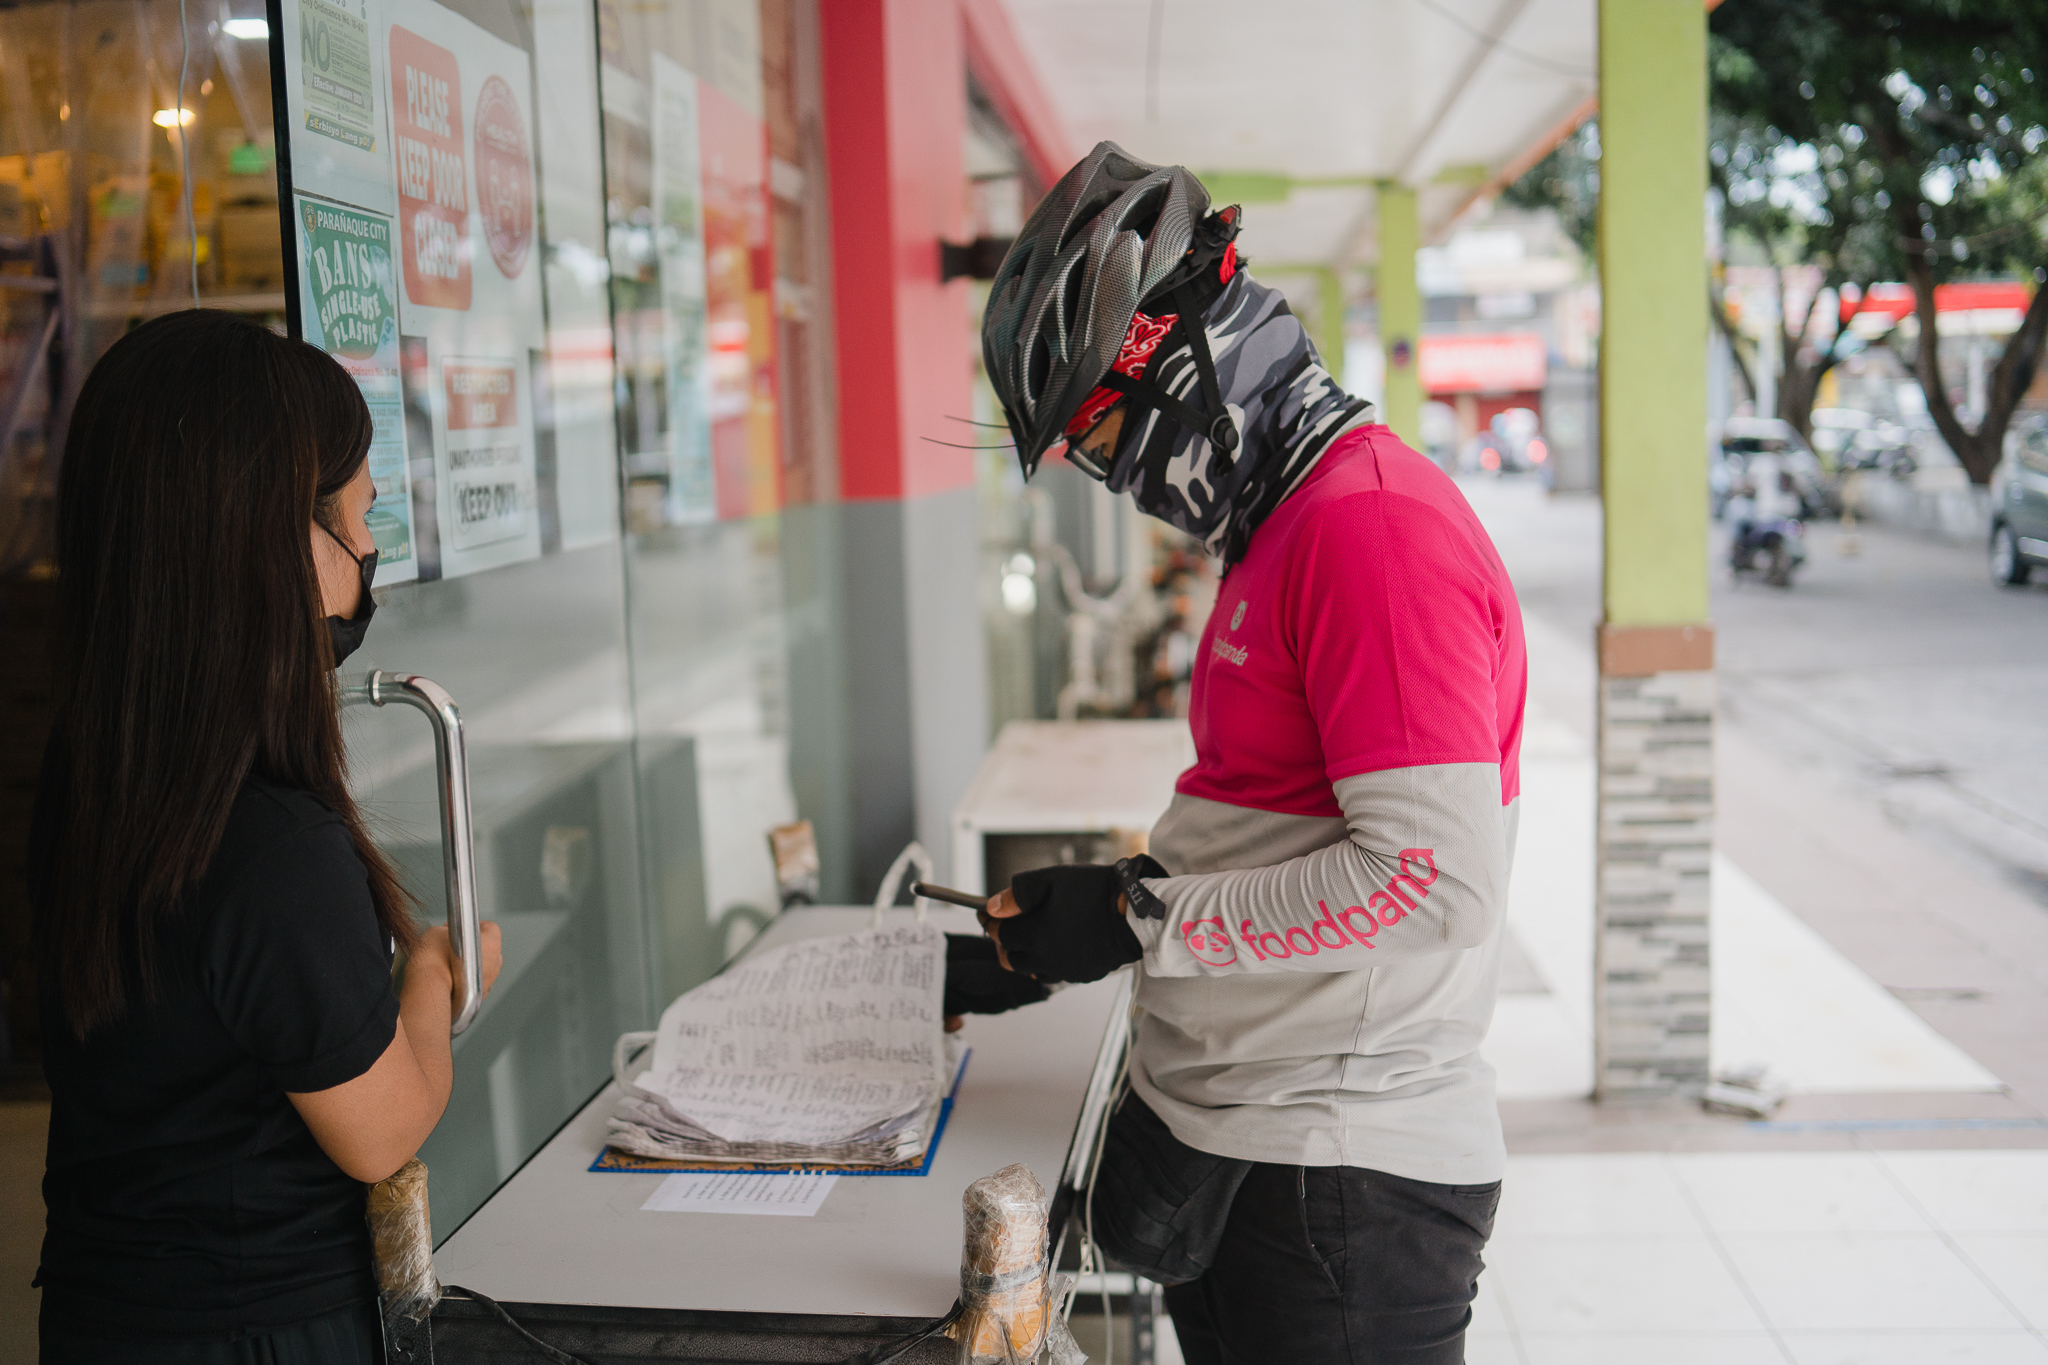 foodpanda, in partnership with Selecta recently started distributing free Selecta ice creams to active foodpanda riders in Metro Manila, to celebrate them as frontline heroes